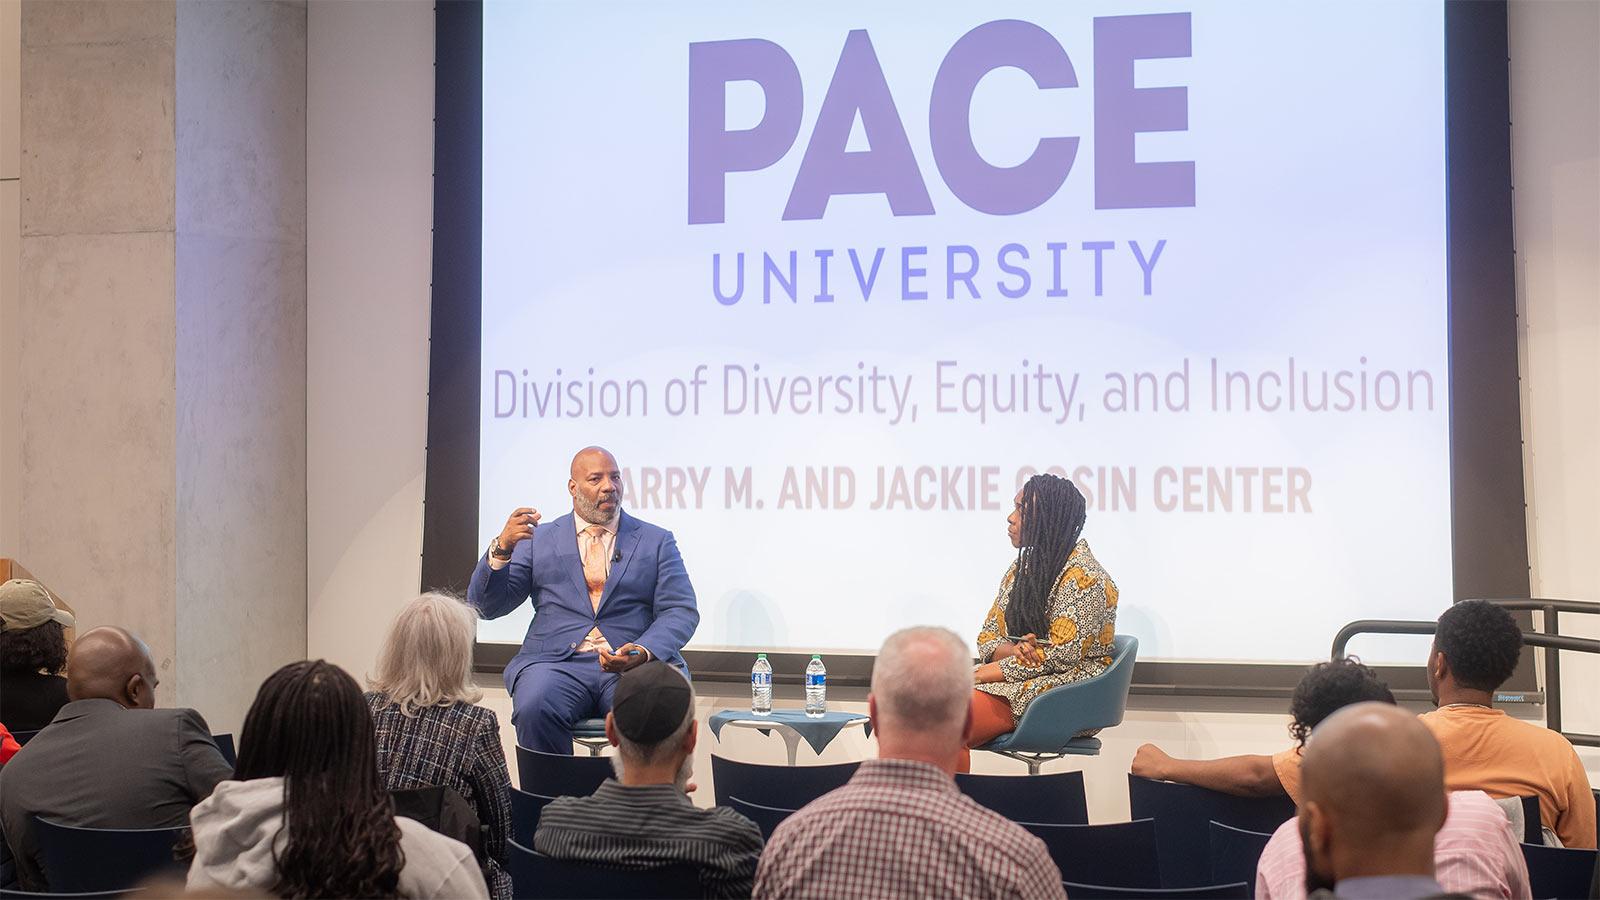 Jelani Cobb and Stephanie Akunvabey speaking on the fragility of higher education